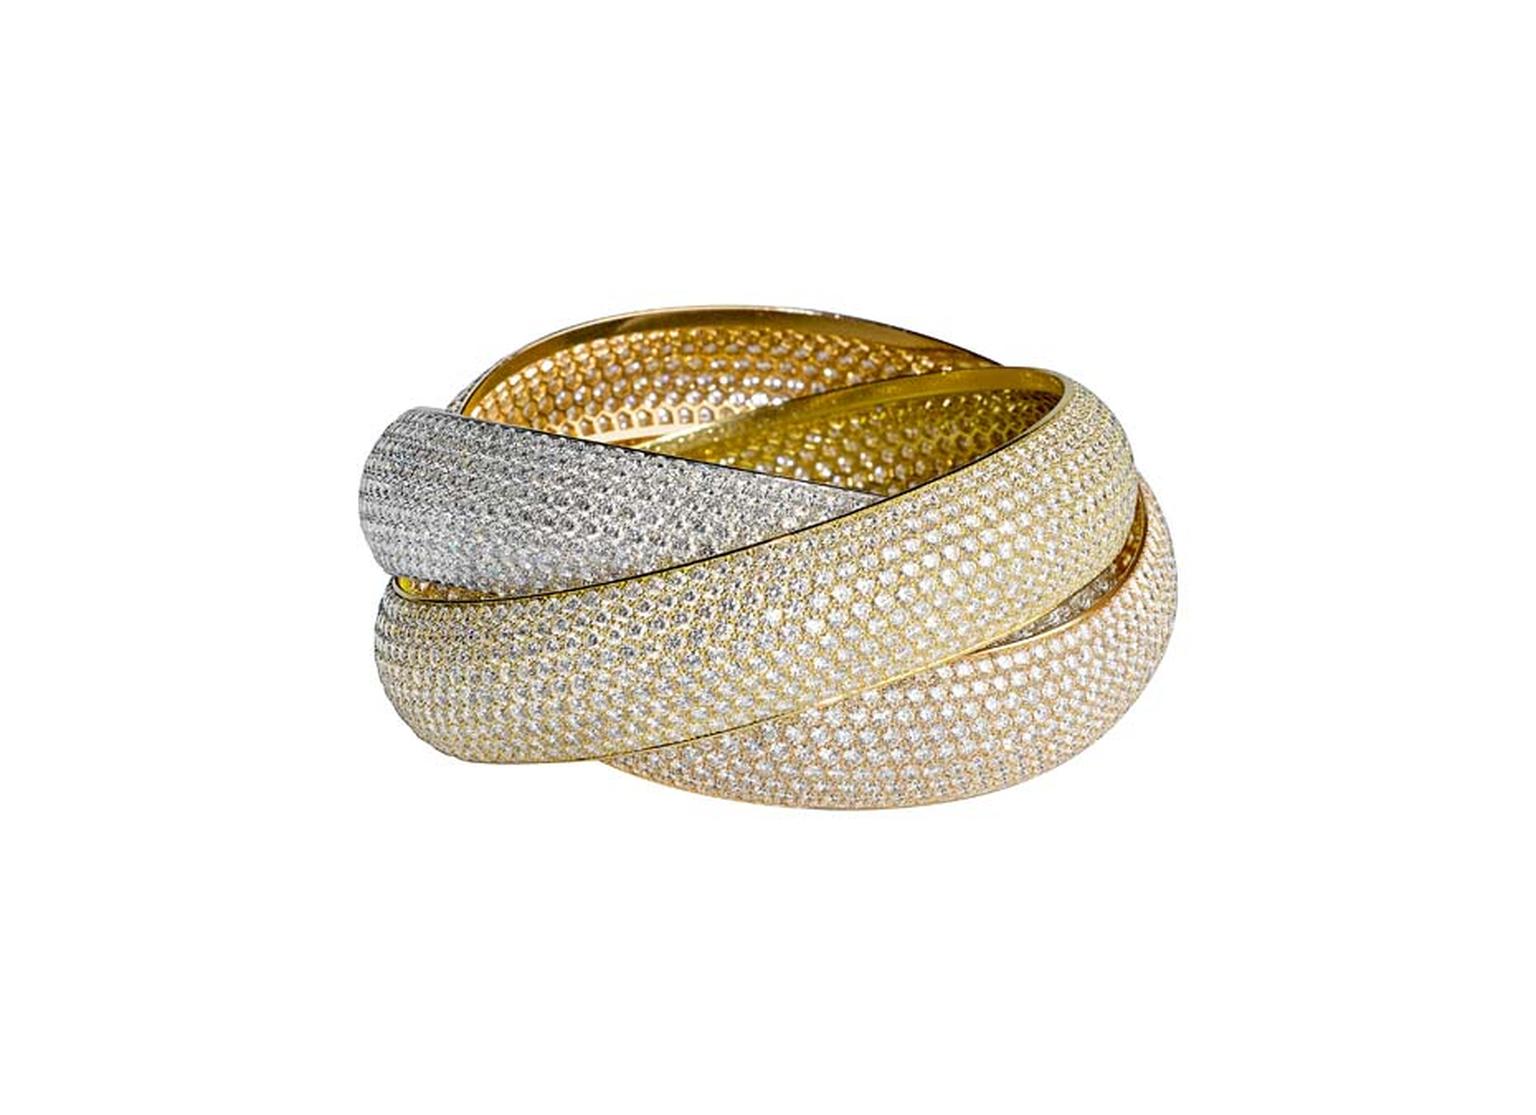 Cartier XXL Trinity bracelet in white, yellow and rose gold, set with 2,727 diamonds.